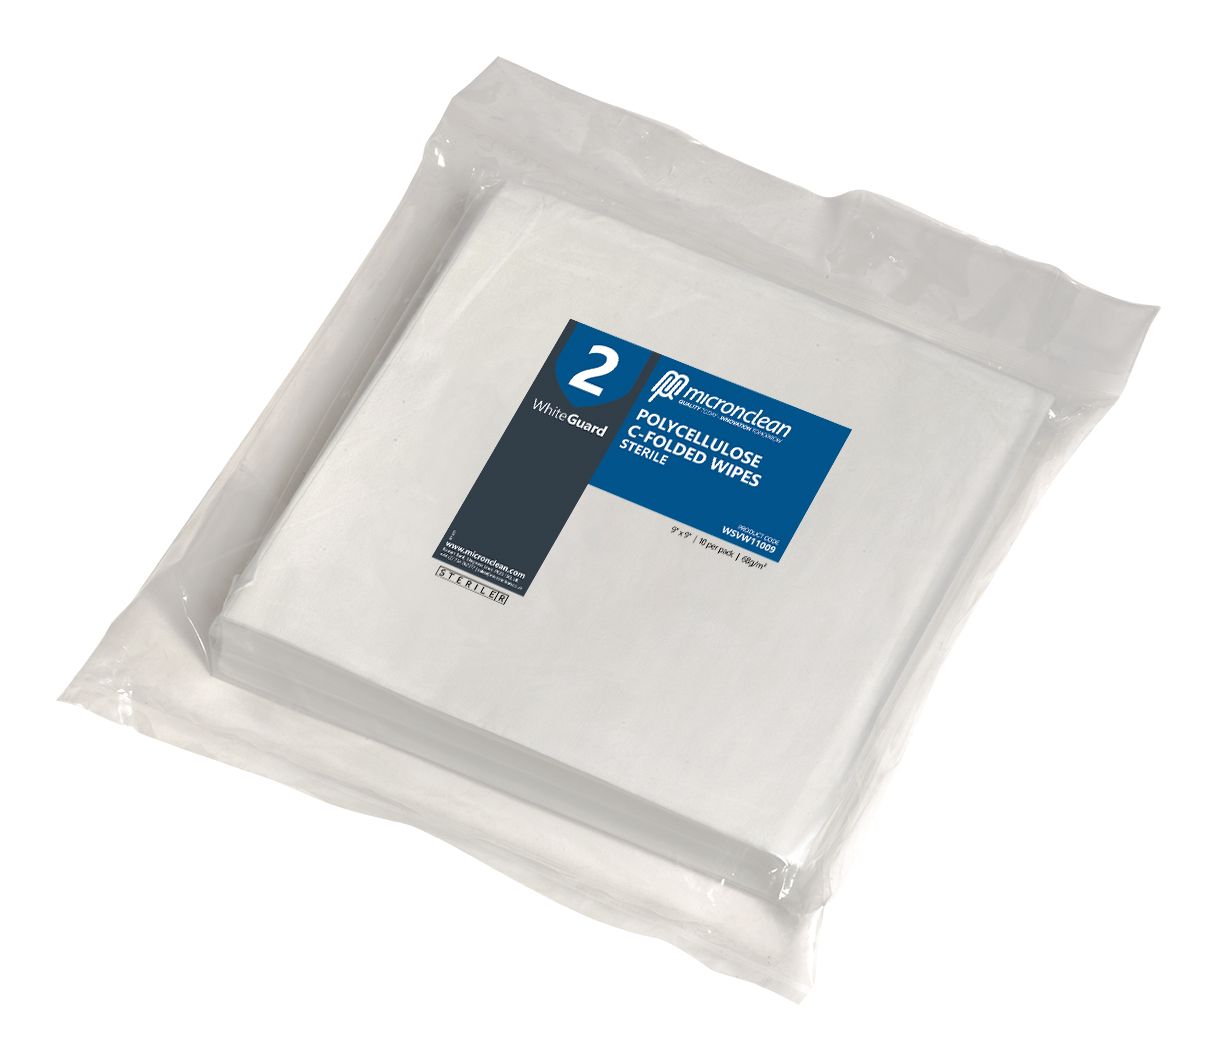 WhiteGuard 2 Polycellulose C-folded Wipes Sterile [ROW]